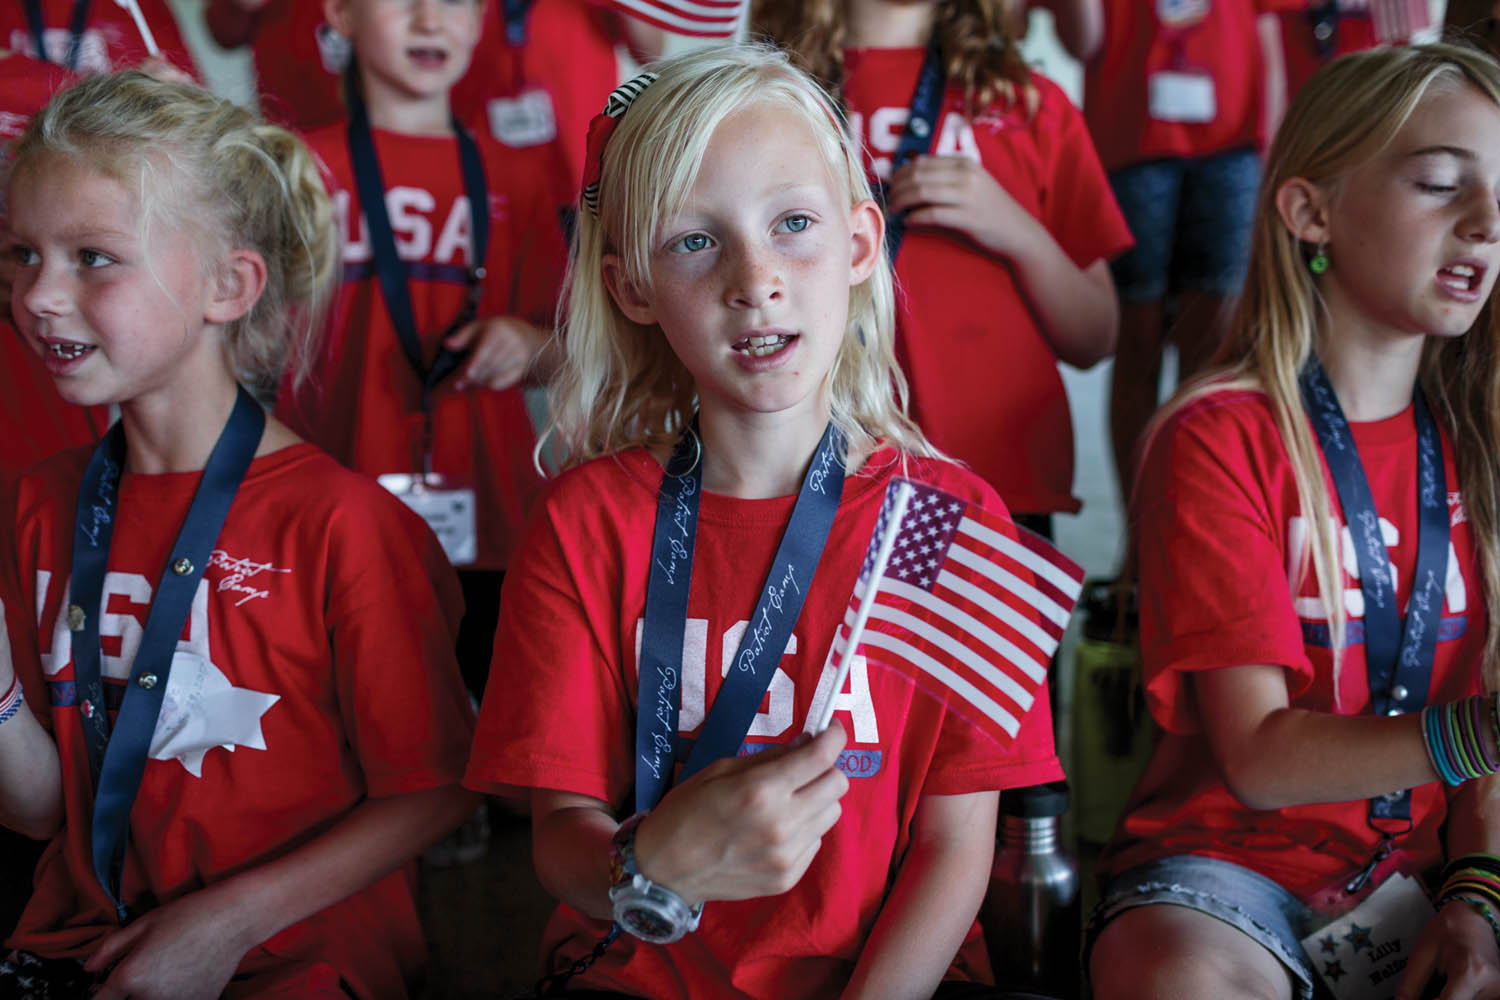 Utah Patriot Camp, a week-long day camp for elementary students in Herriman, UT, teaches the Constitution, American values, military history, and Bible study, among other courses. Photographed by Sarah Blesener